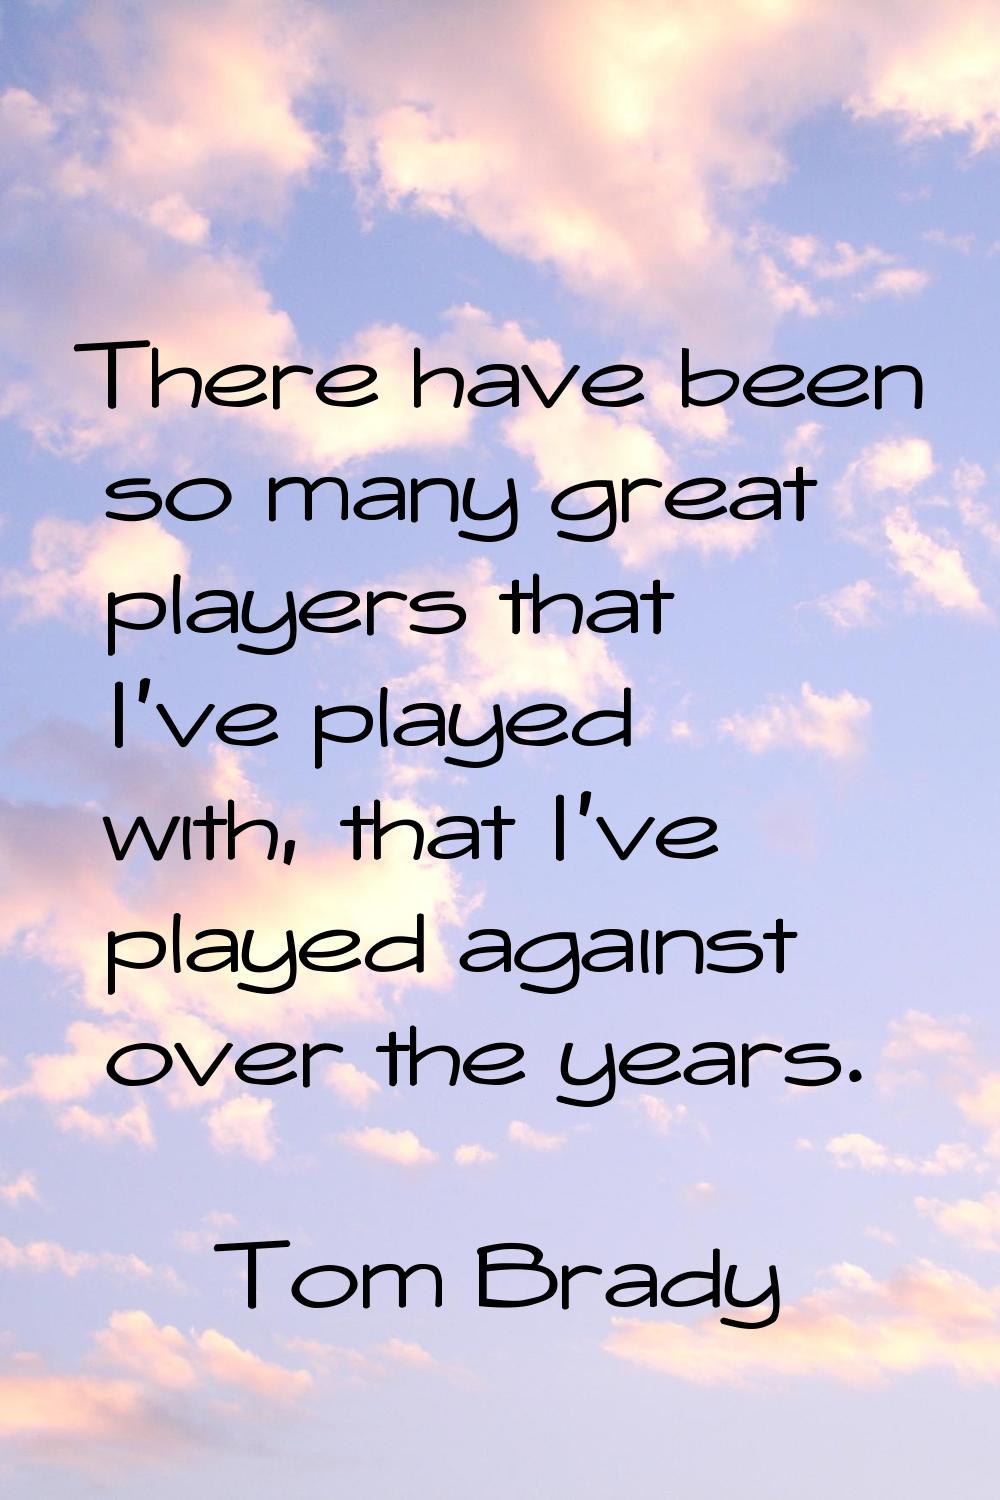 There have been so many great players that I've played with, that I've played against over the year